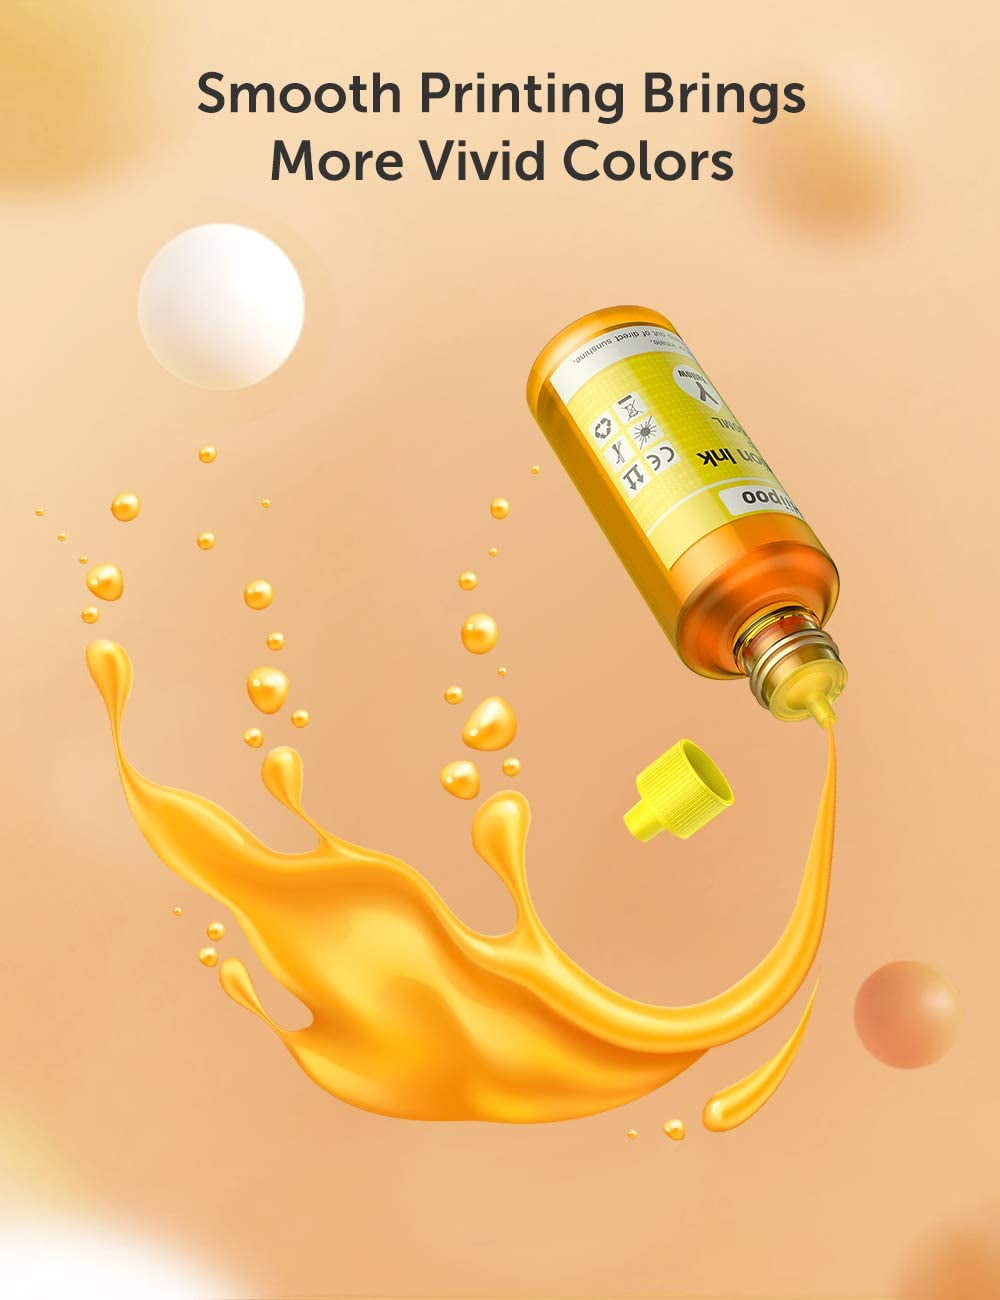 InkSol® High Definition Sublimation Ink - Yellow